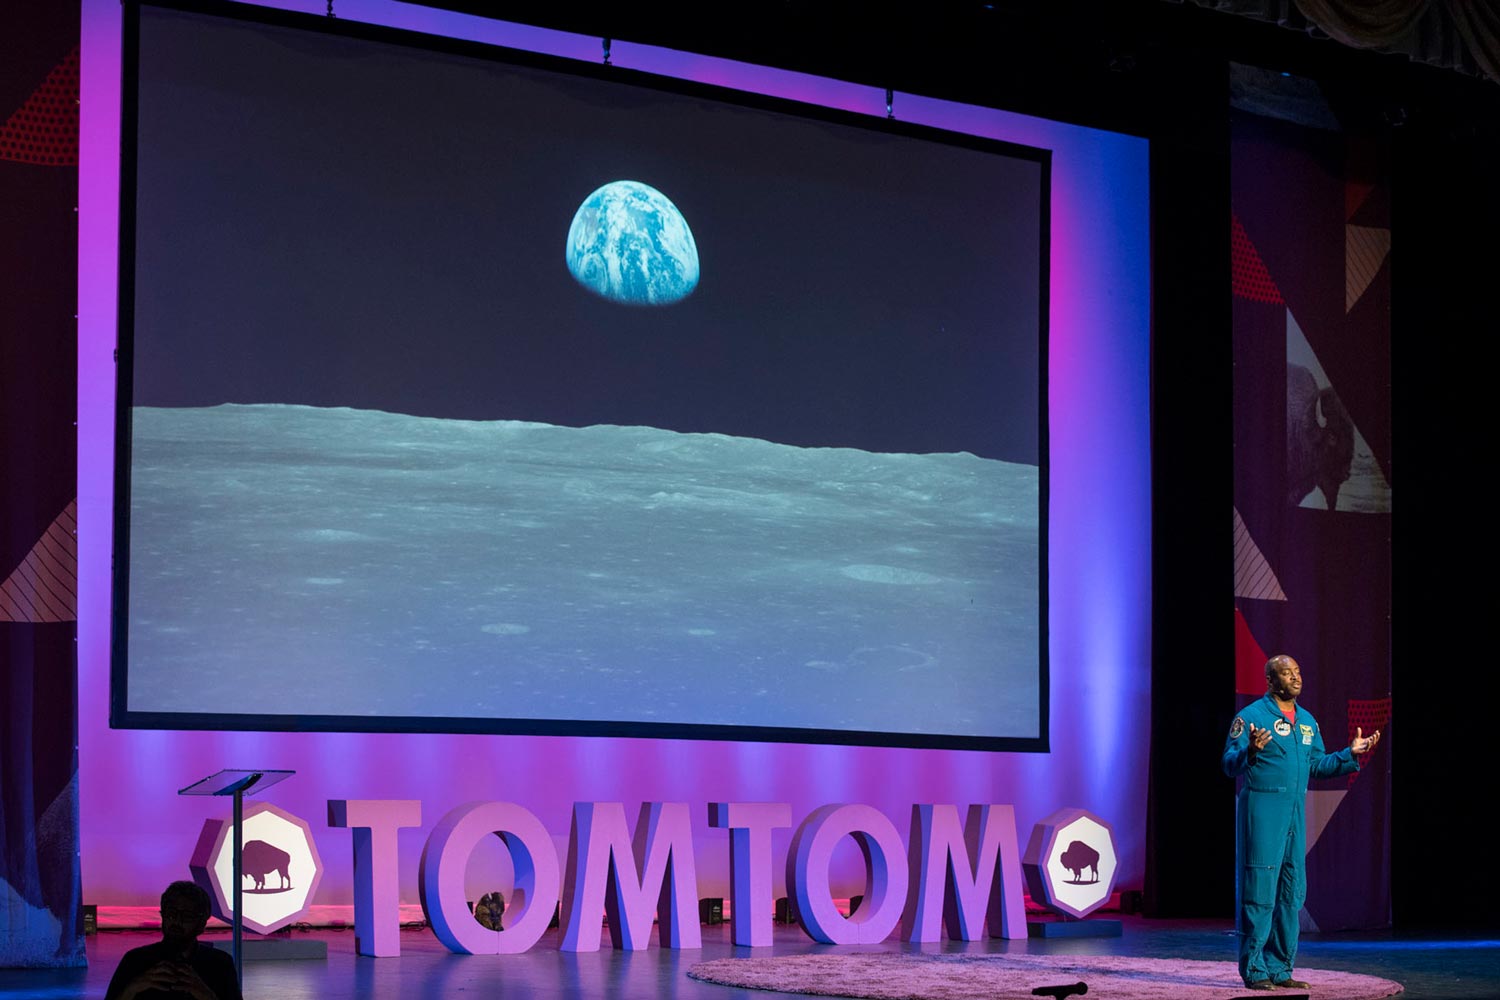 Melvin speaking on stage with the earth as seen from the moon on screen